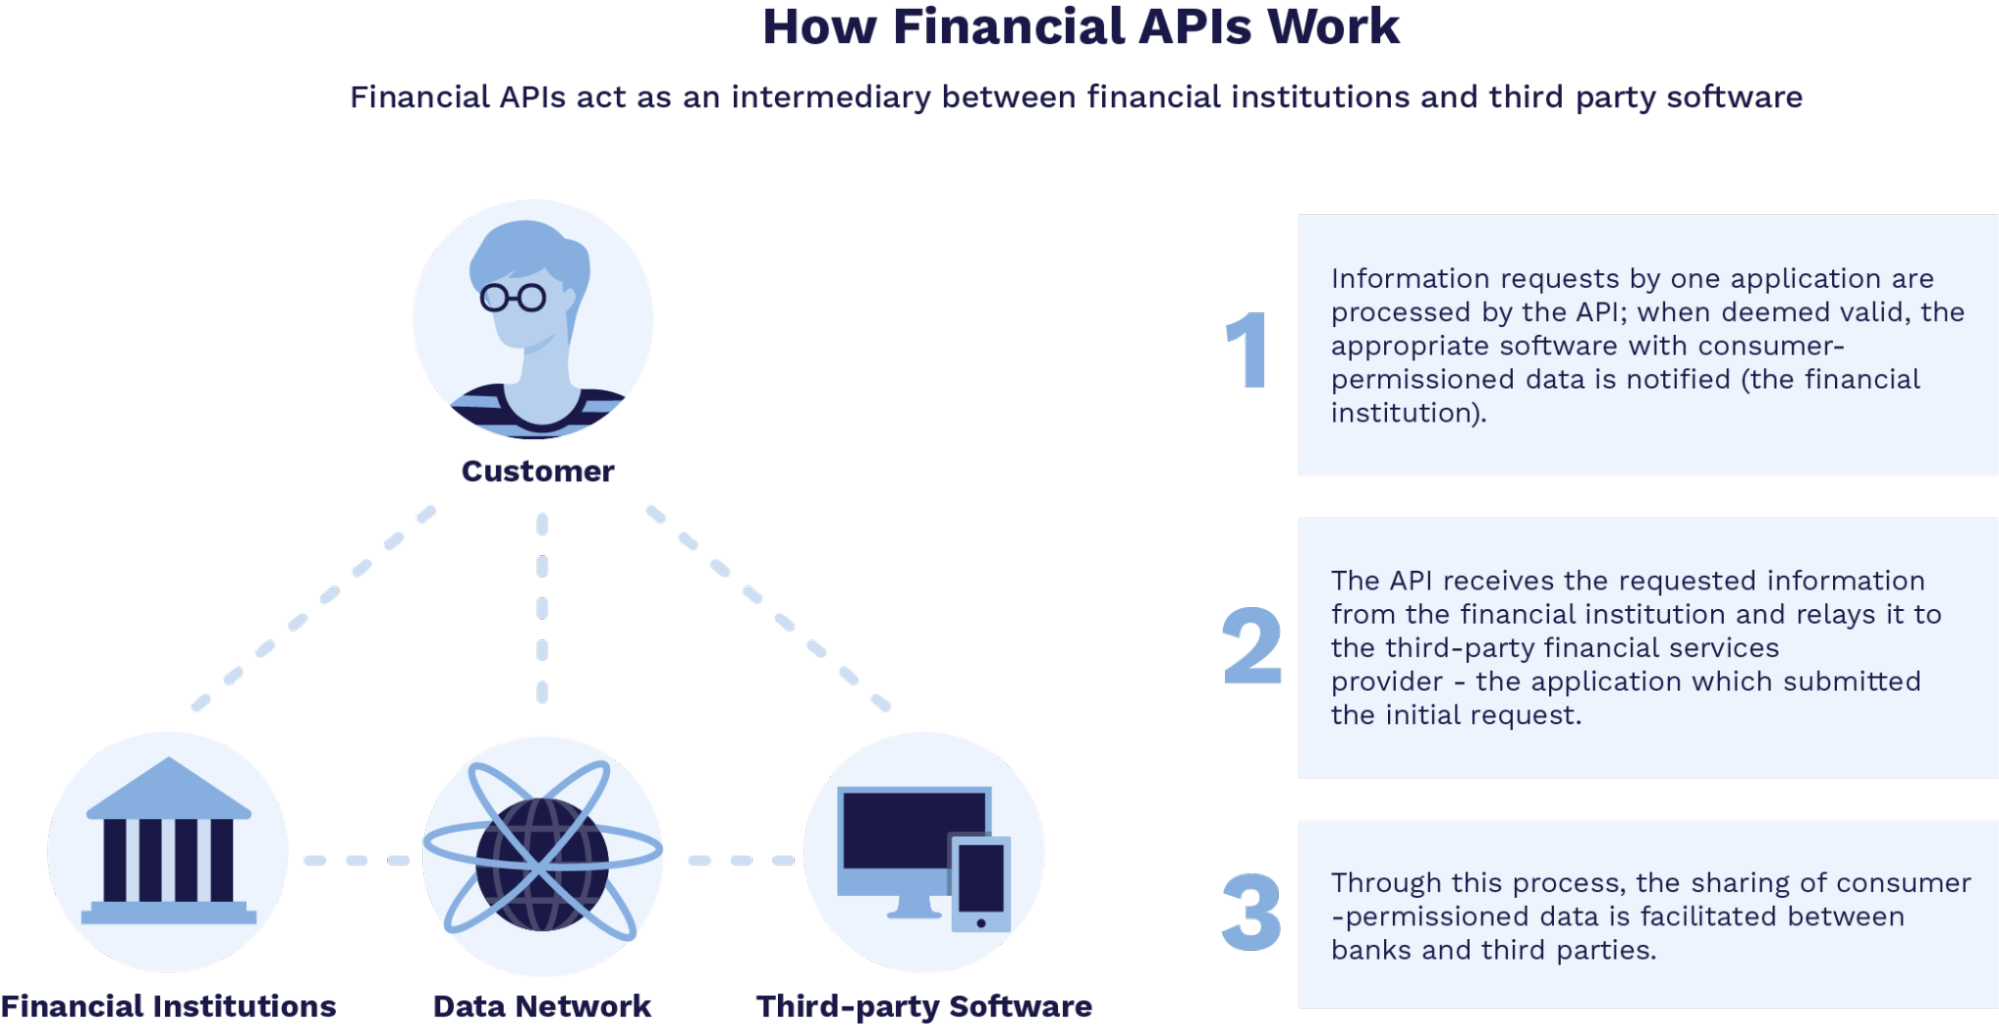 How Financial APIs Work  Financial APIs act as an intermediary between financial institutions and third party software  1. Information requests by one application are processed by the API; when deemed valid, the appropriate software with consumer-permissioned data is notified (the financial institution).   2. The API receives the requested information from the financial institution and relays it to the third-party financial services provider - the application which submitted the initial request.   3. Through this process, the sharing of consumer-permissioned data is facilitated between banks and third parties.